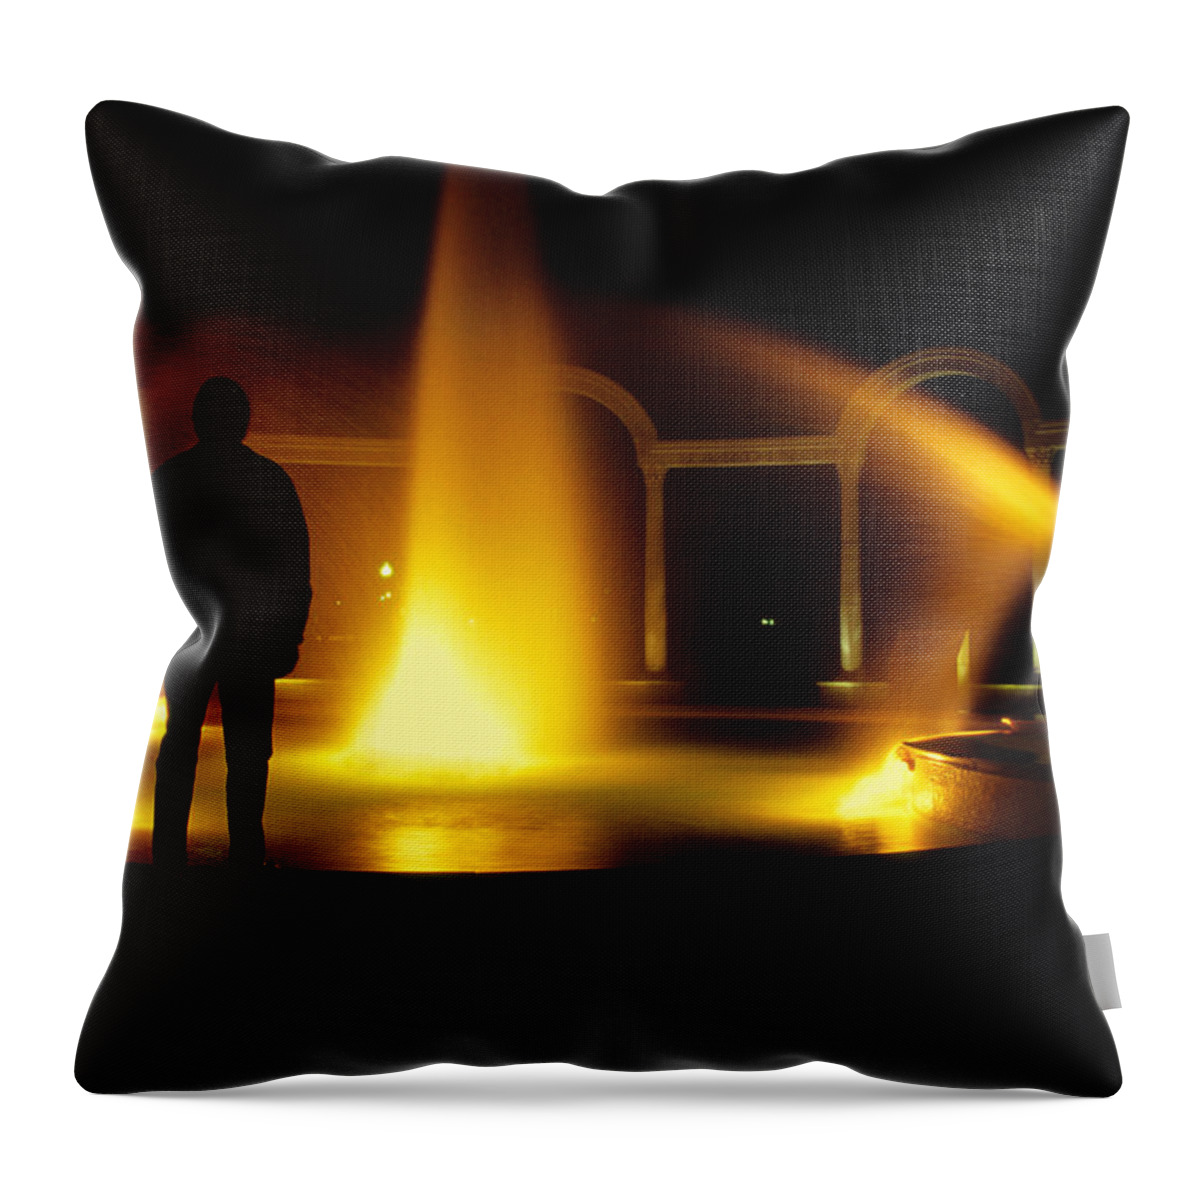 Mysterious Throw Pillow featuring the photograph Fountain Silhouette by Jason Politte